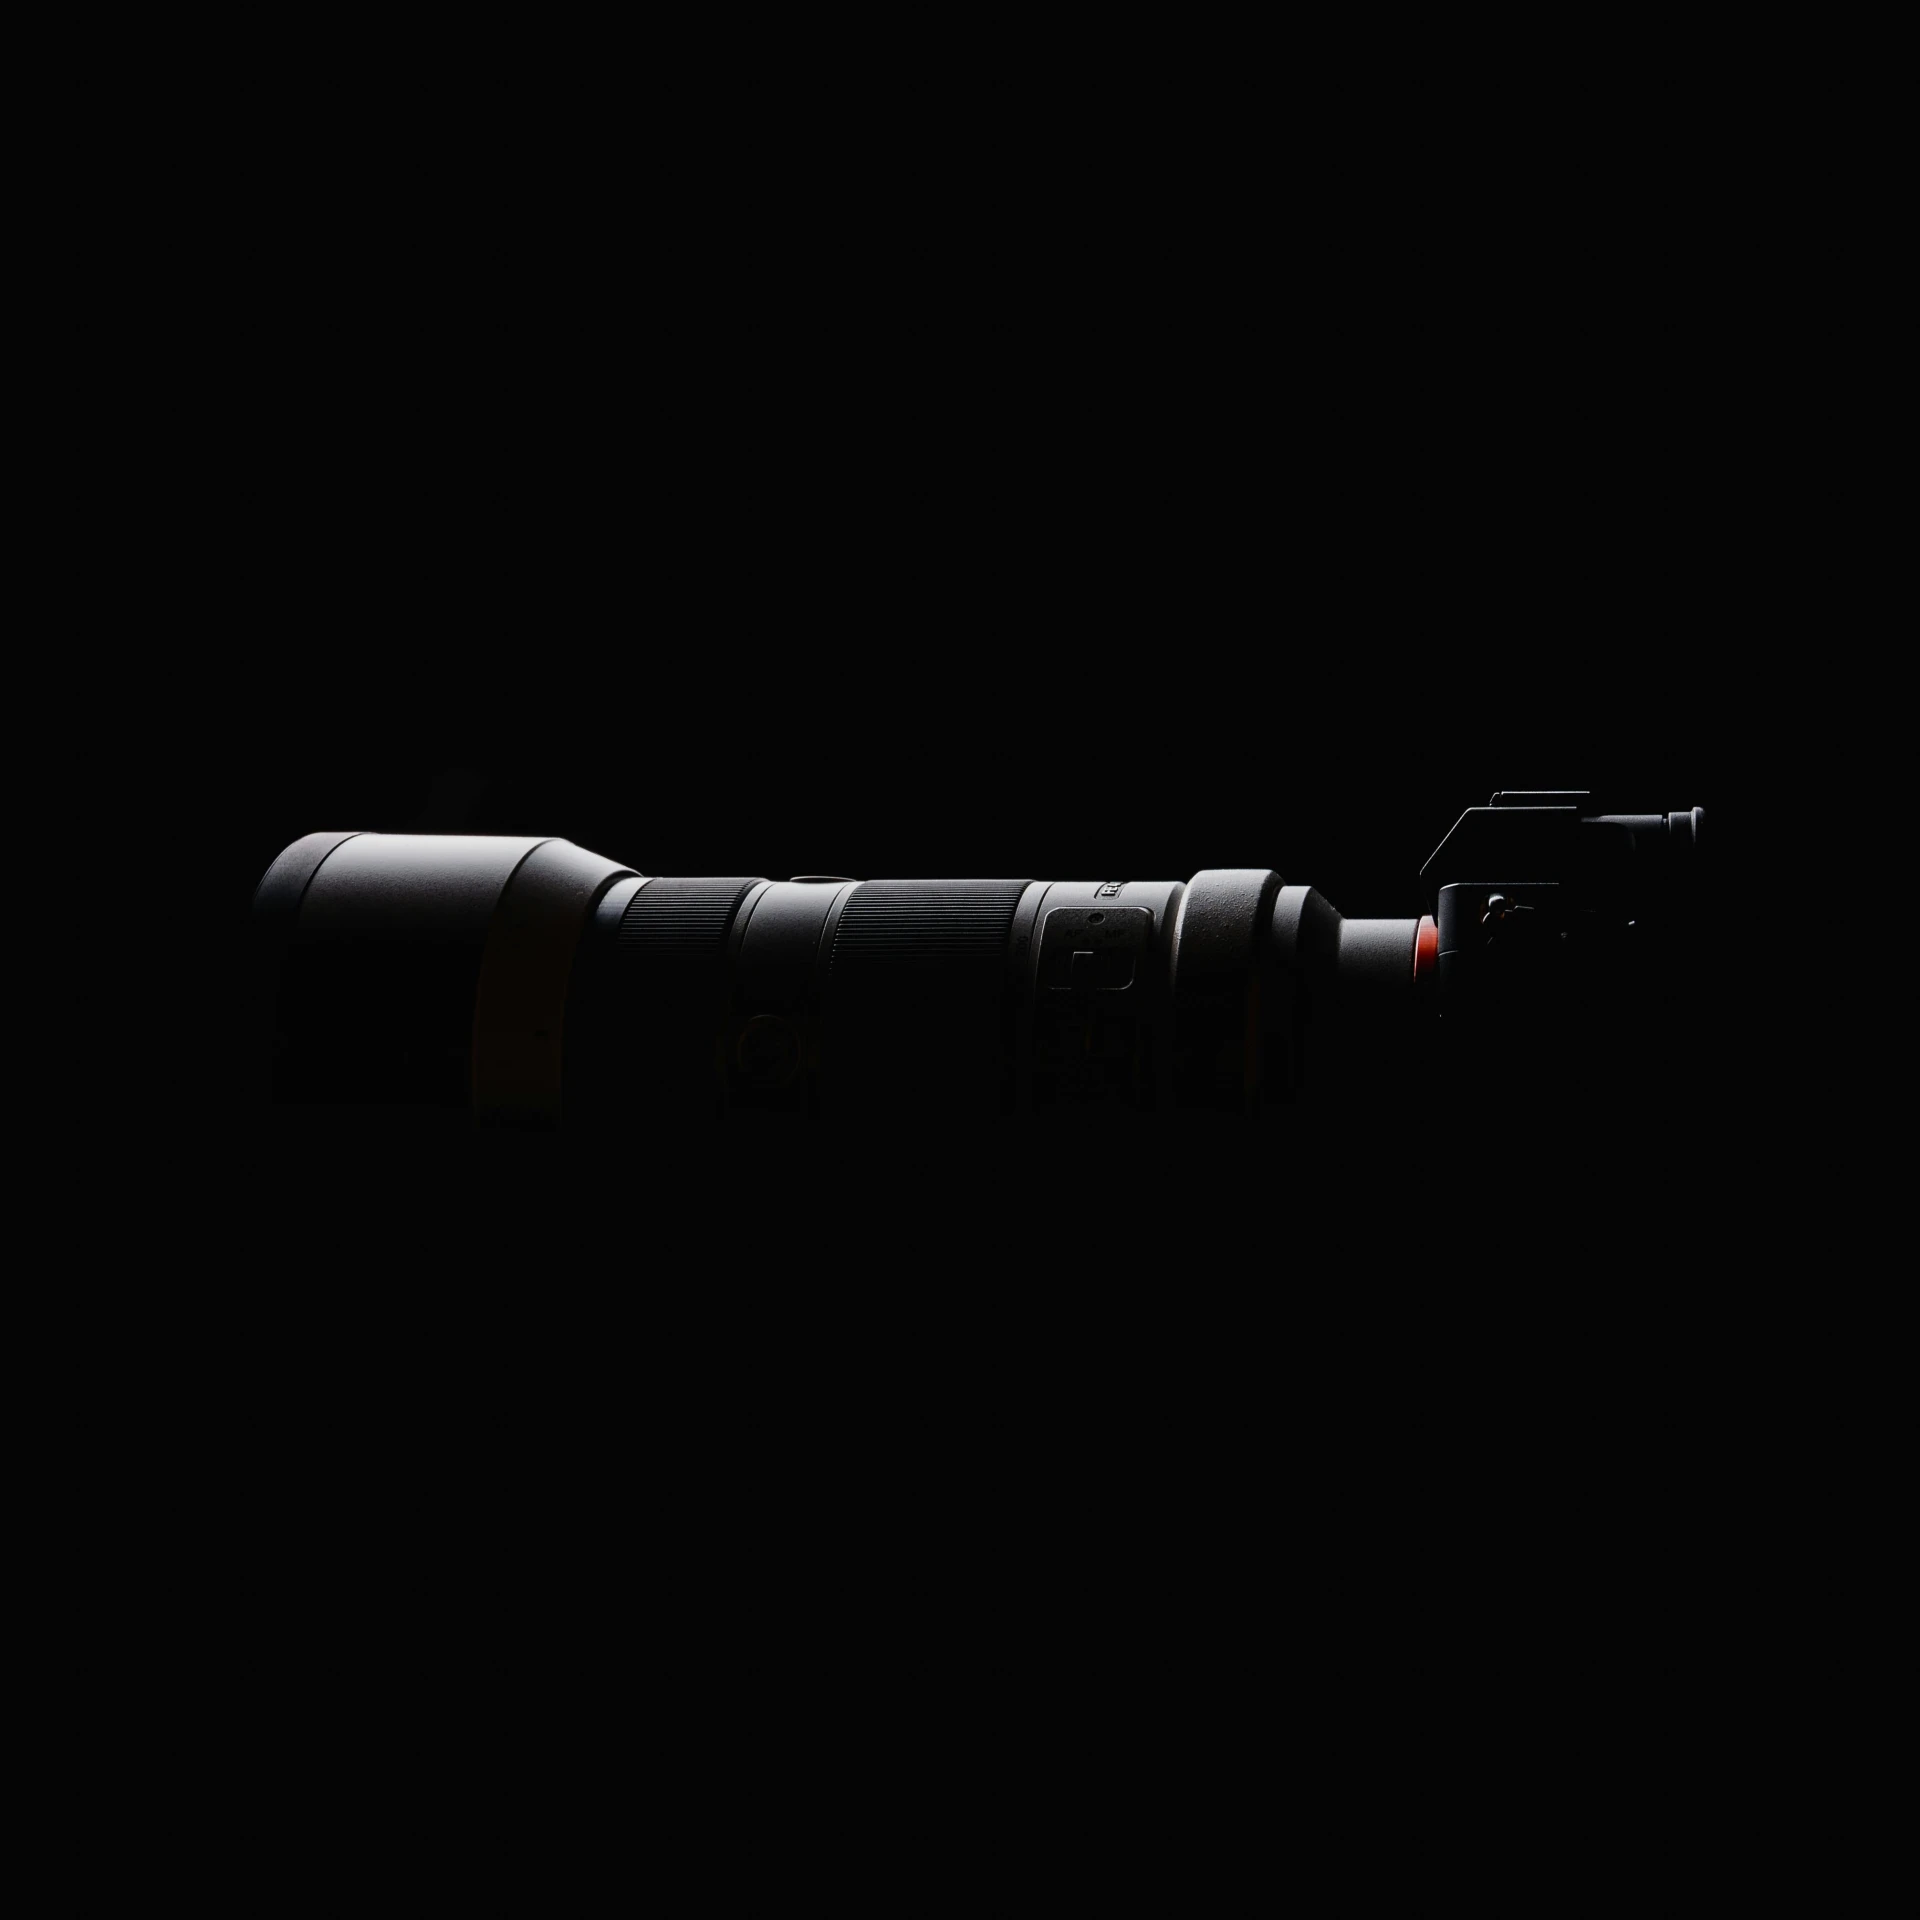 a close up of a camera on a black background, by Tadashi Nakayama, of a lightsaber hilt, canon rf 8 0 0 mm f / 5. 6 l, full body profile camera shot, detailed product image